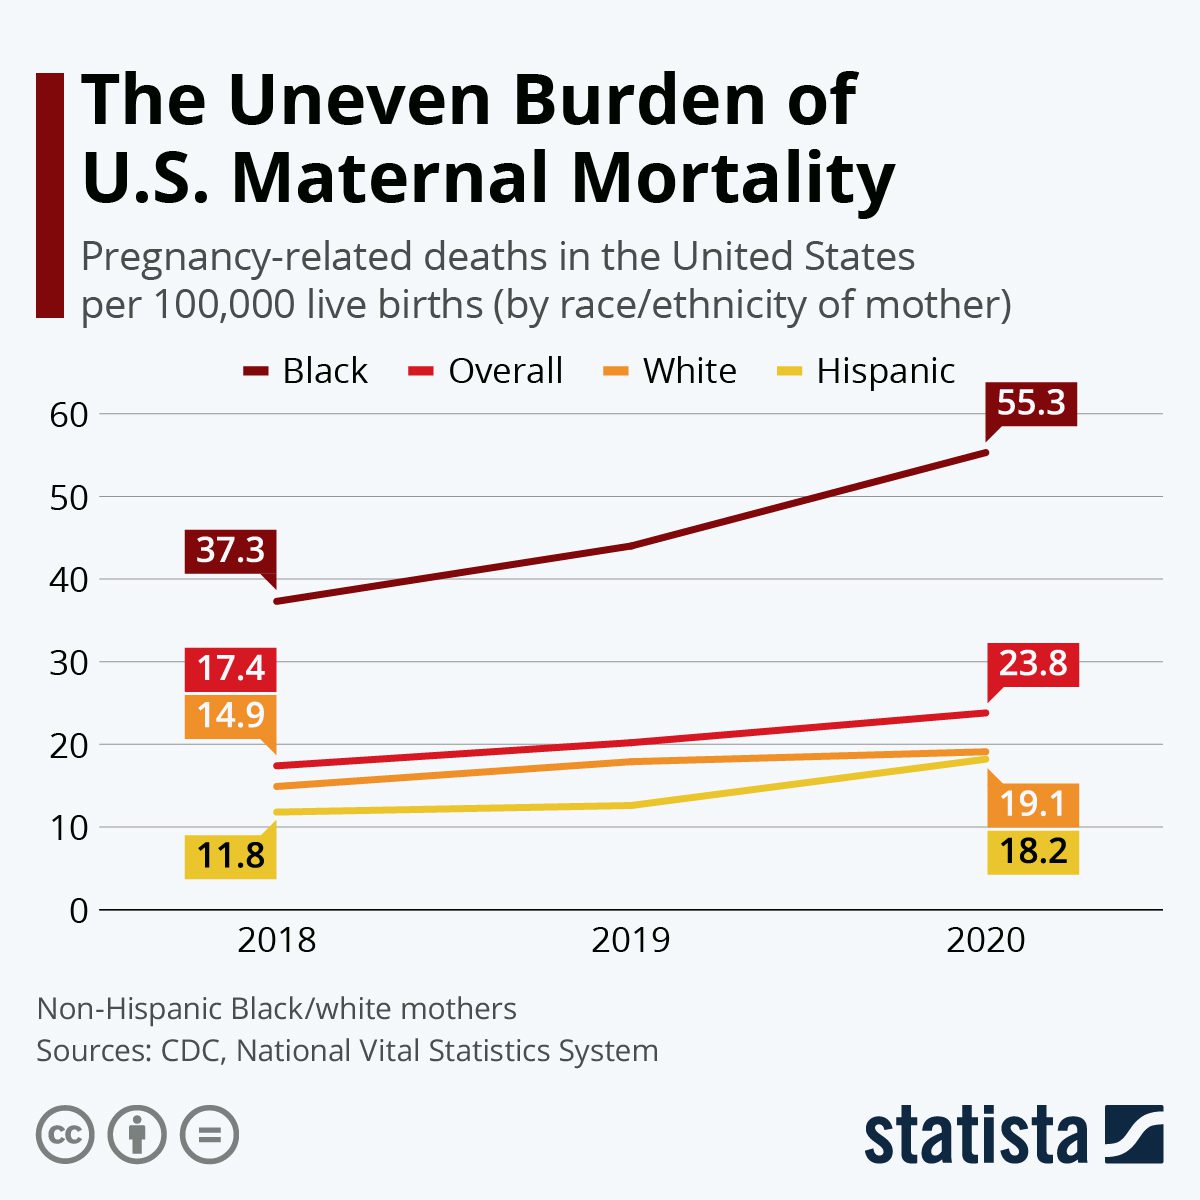 Graph showing pregnancy-related deaths in US by race/ethnicity of mother.